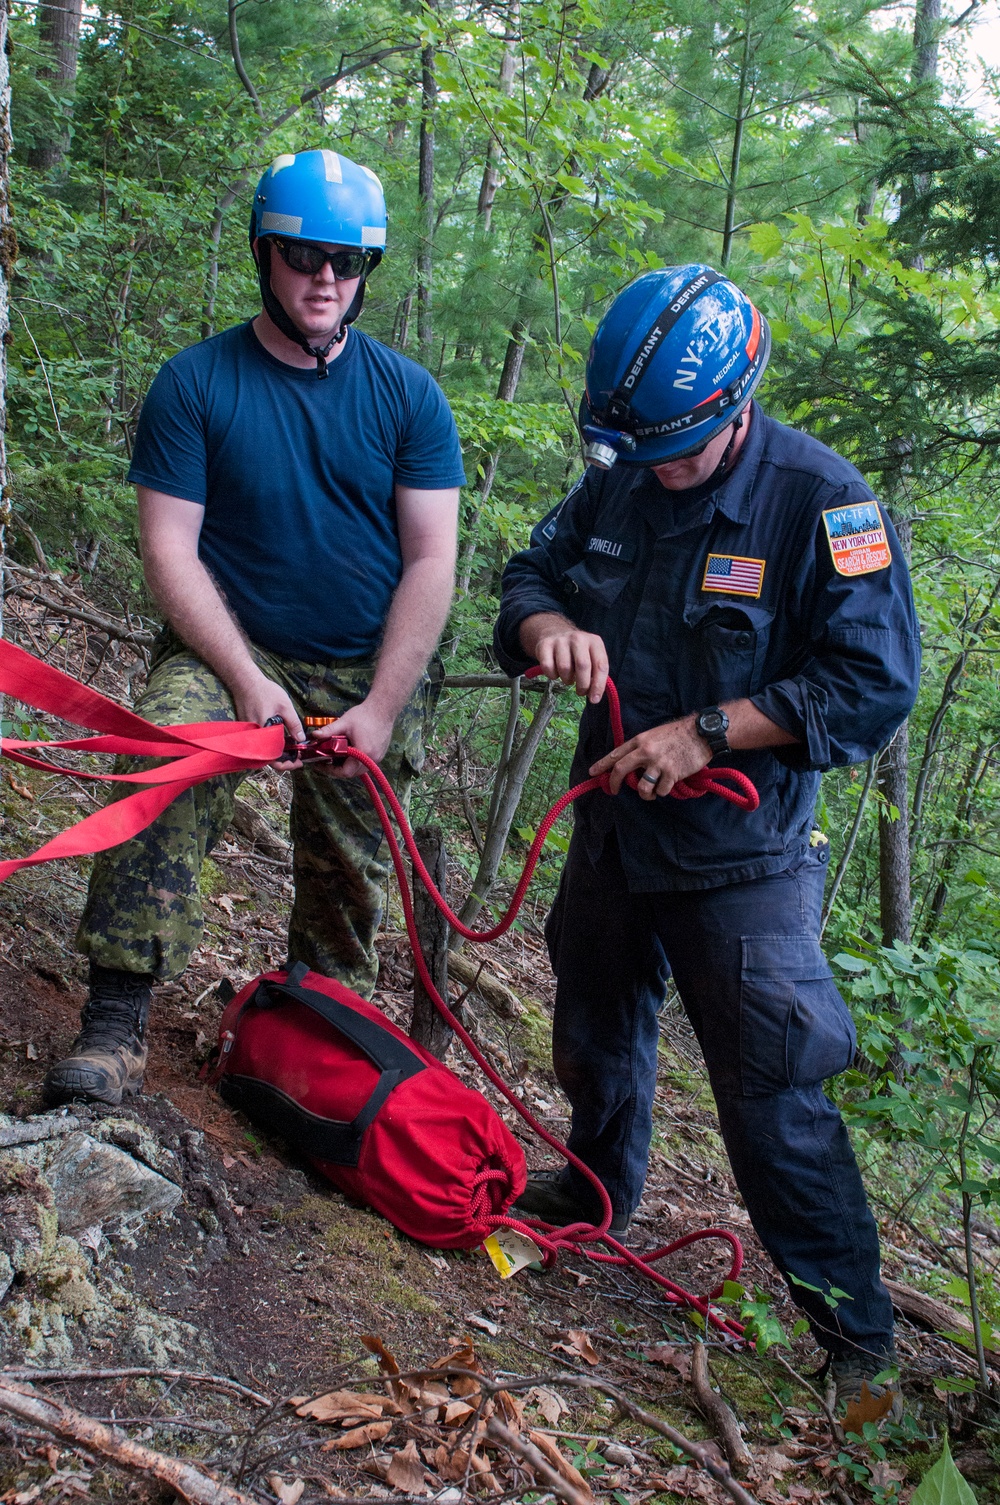 Participants Conduct Search and Rescue Operations